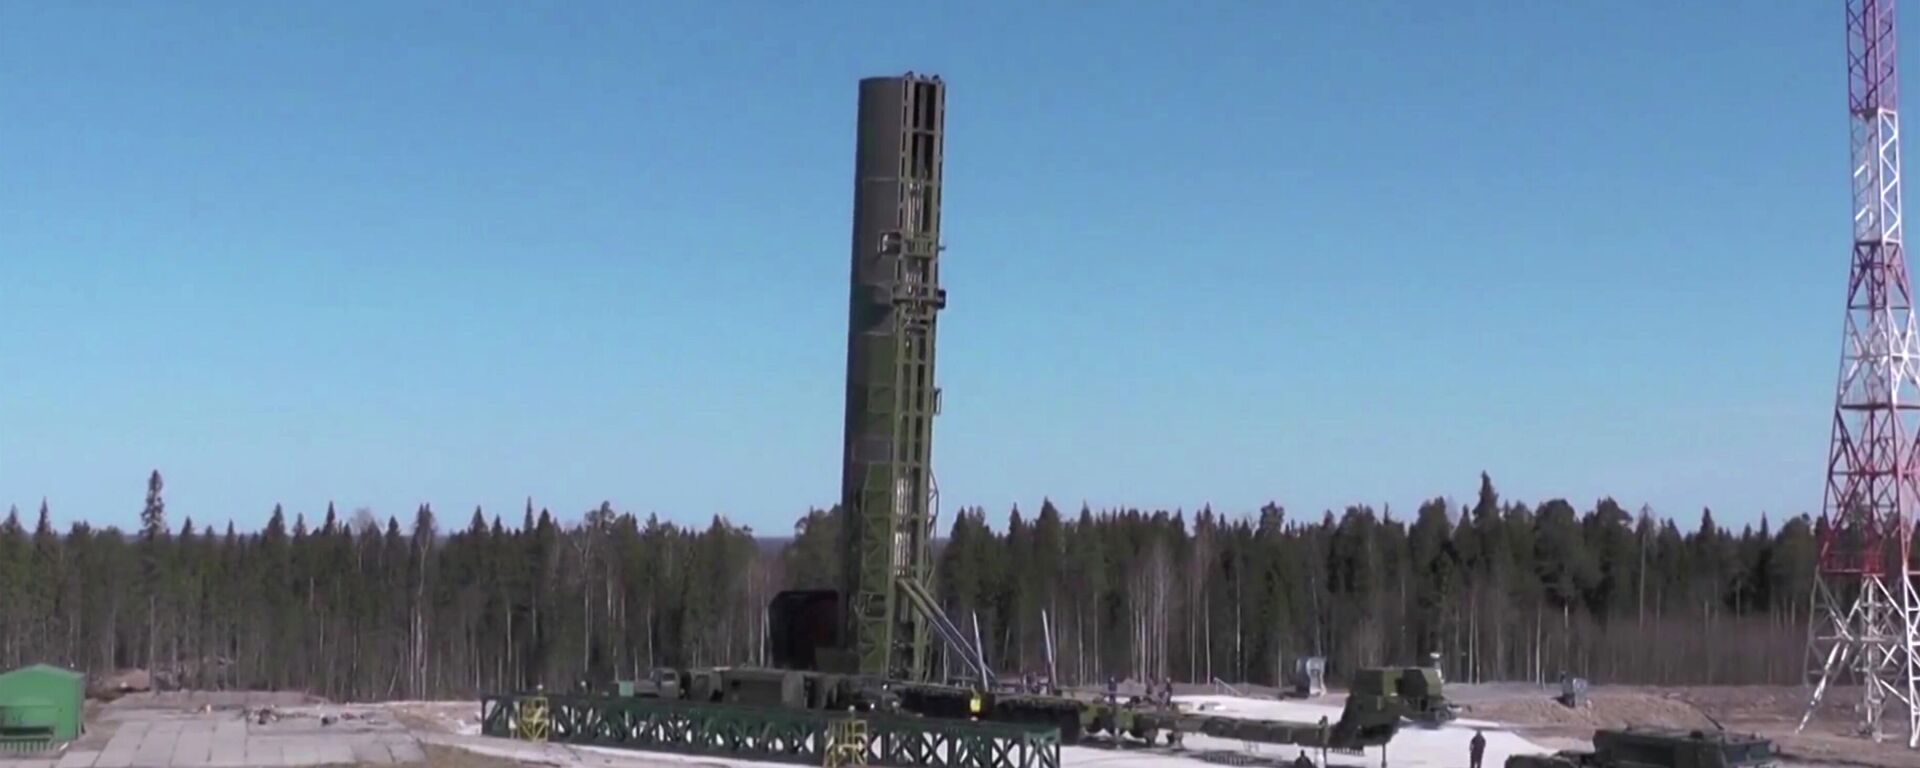 Loading a ballistic missile Sarmat before launch during testing. Screenshot of a video provided by the RF Ministry of Defense. - Sputnik International, 1920, 22.09.2022